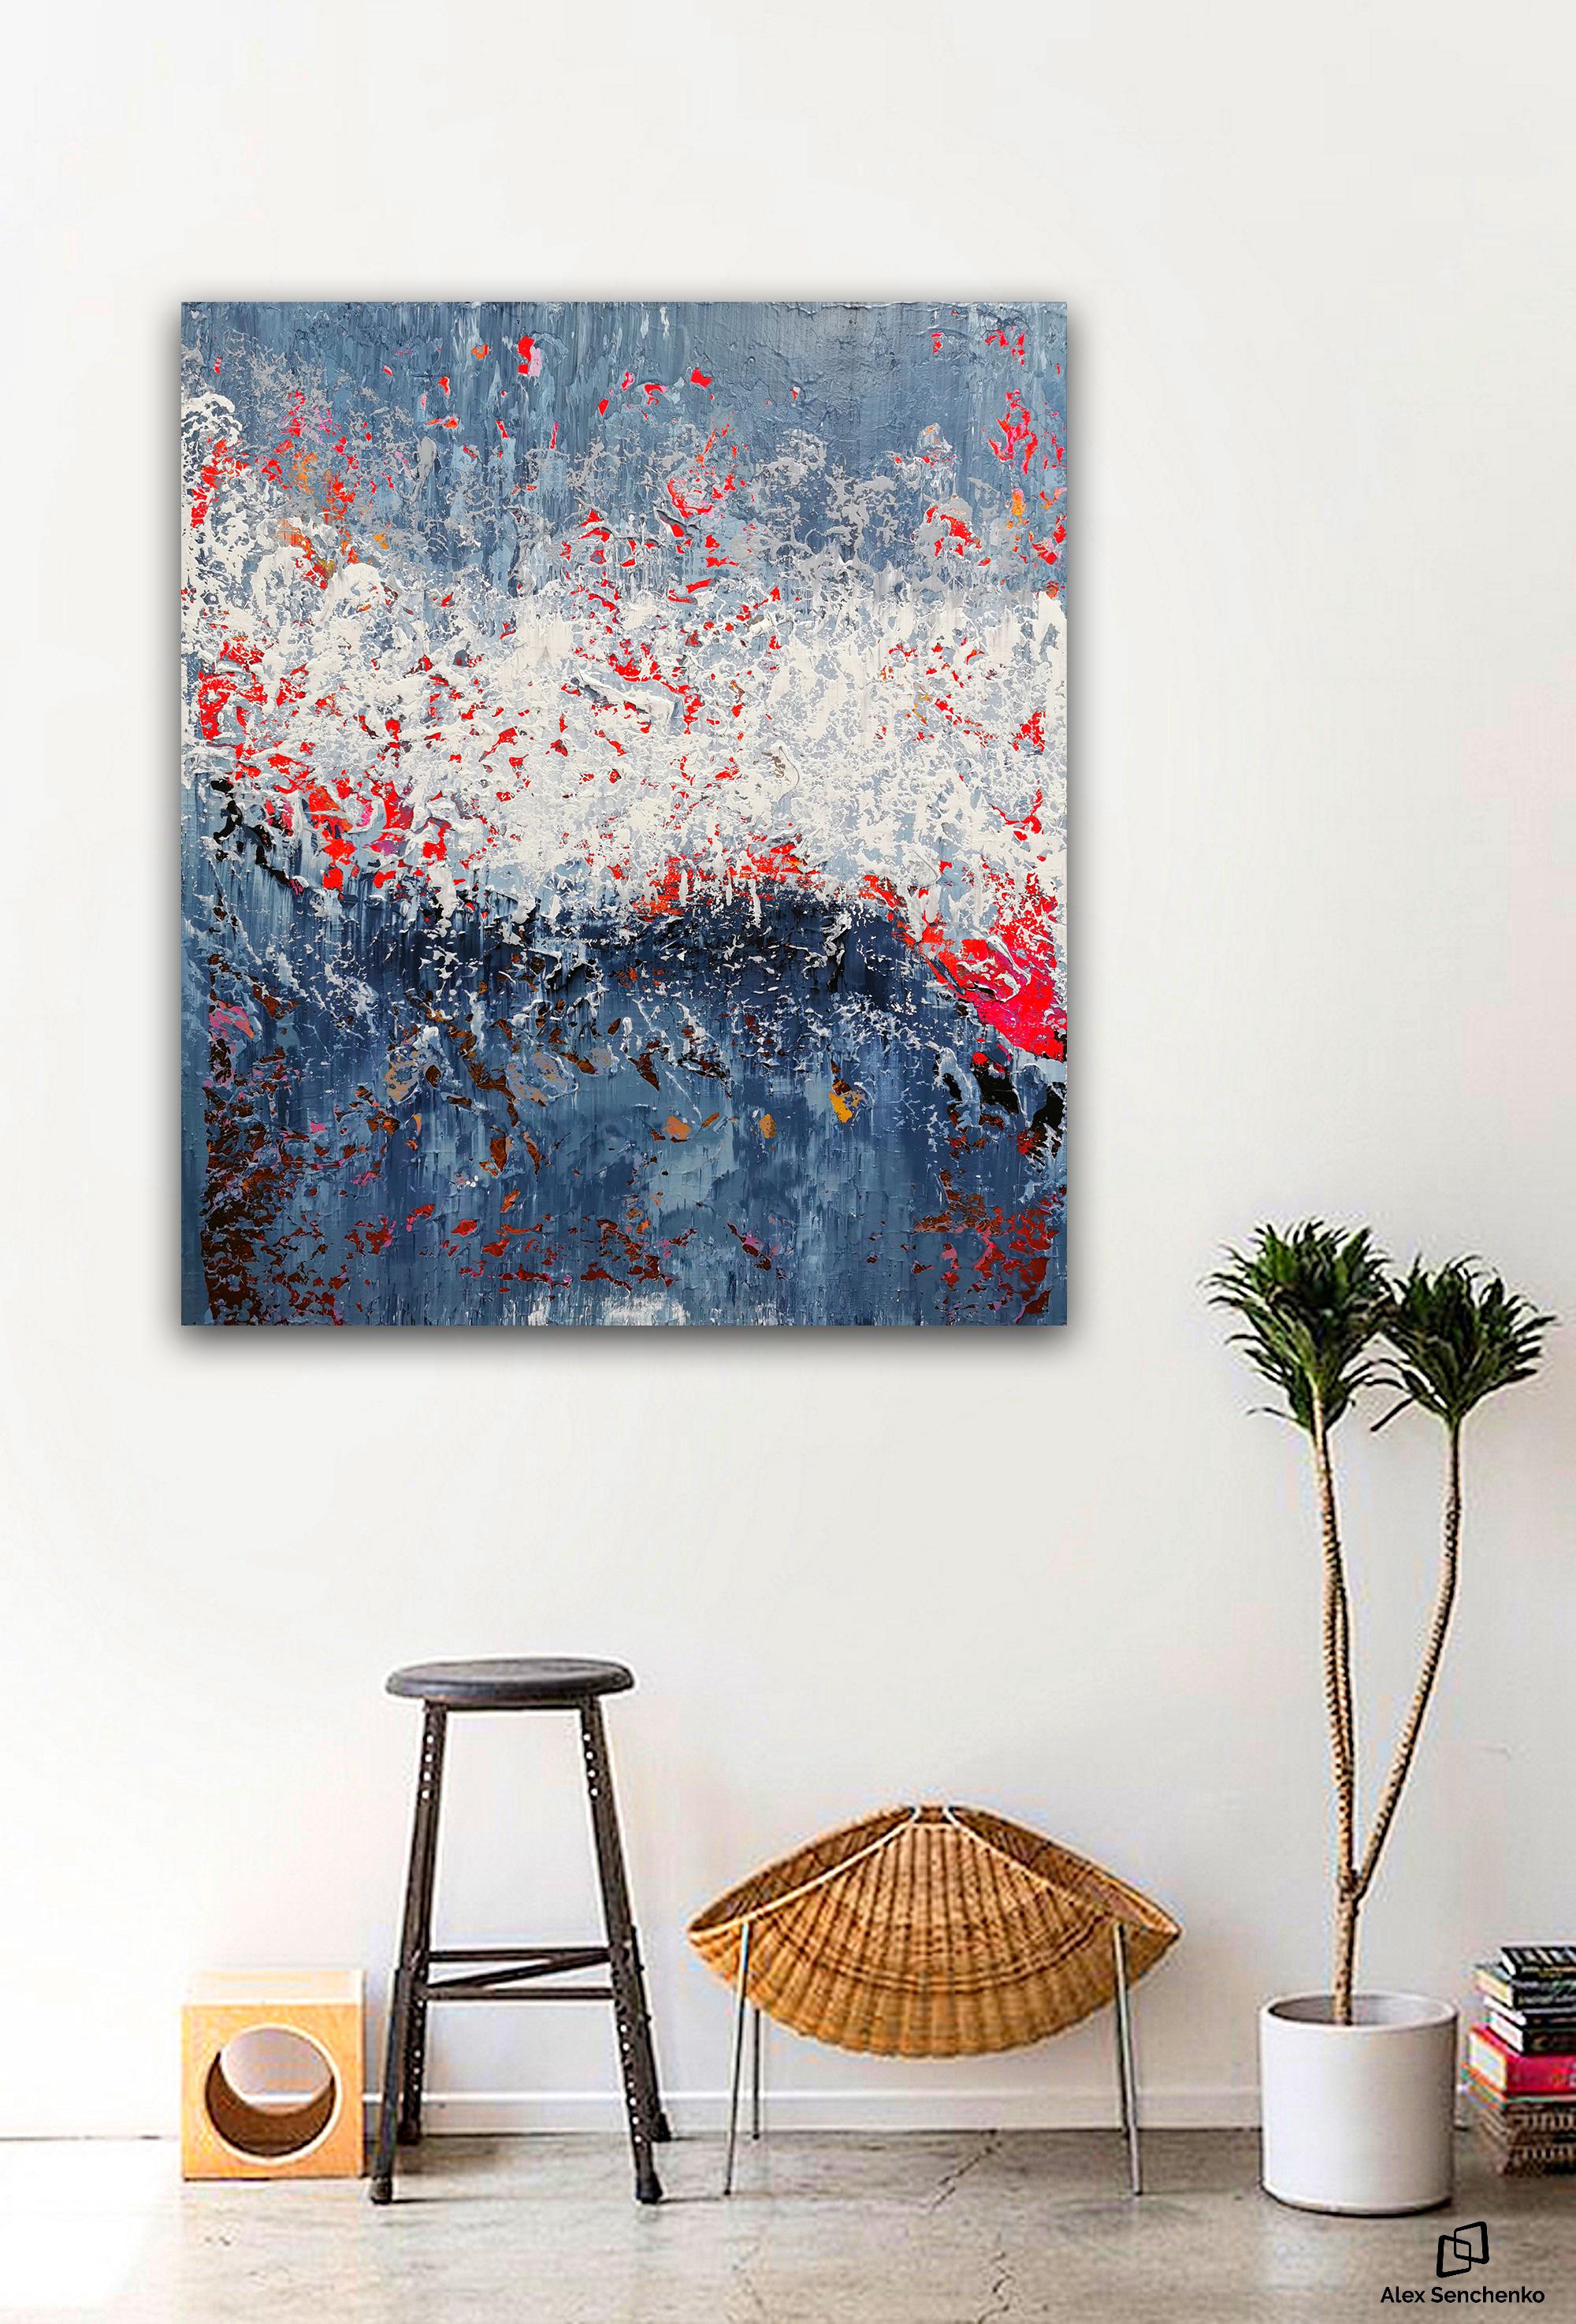 Abstract 1186 - painting is a powerful vision of Love’s vibration, Compassion’s strength, and Hope’s vitality. Woosh away your worries! Feel the exhilarating and mighty presence of Warmth of Love lifting you ever higher toward actualizing your